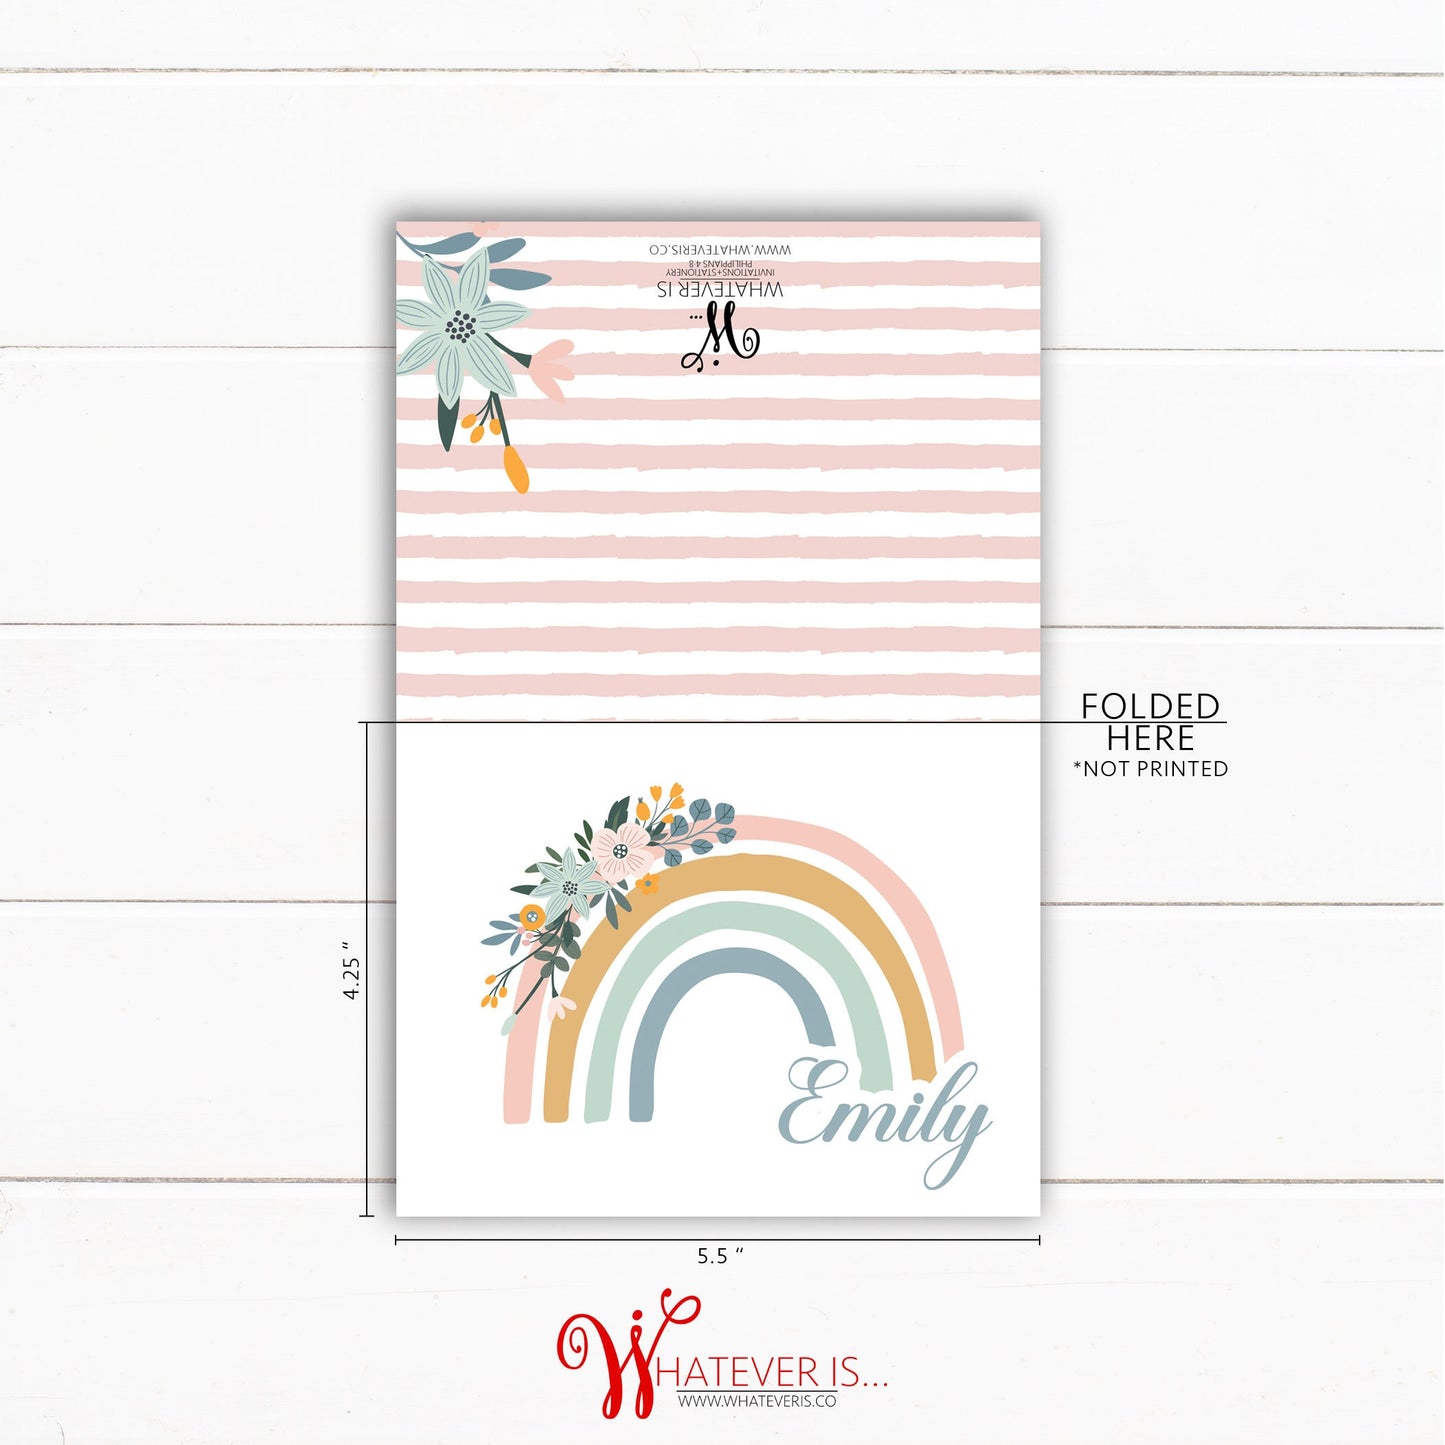 Personalized Notecards | Boho Rainbow Notecards | Personalized Stationery | Teacher Gift | Greeting Card | Personalized Gift | Set of 12